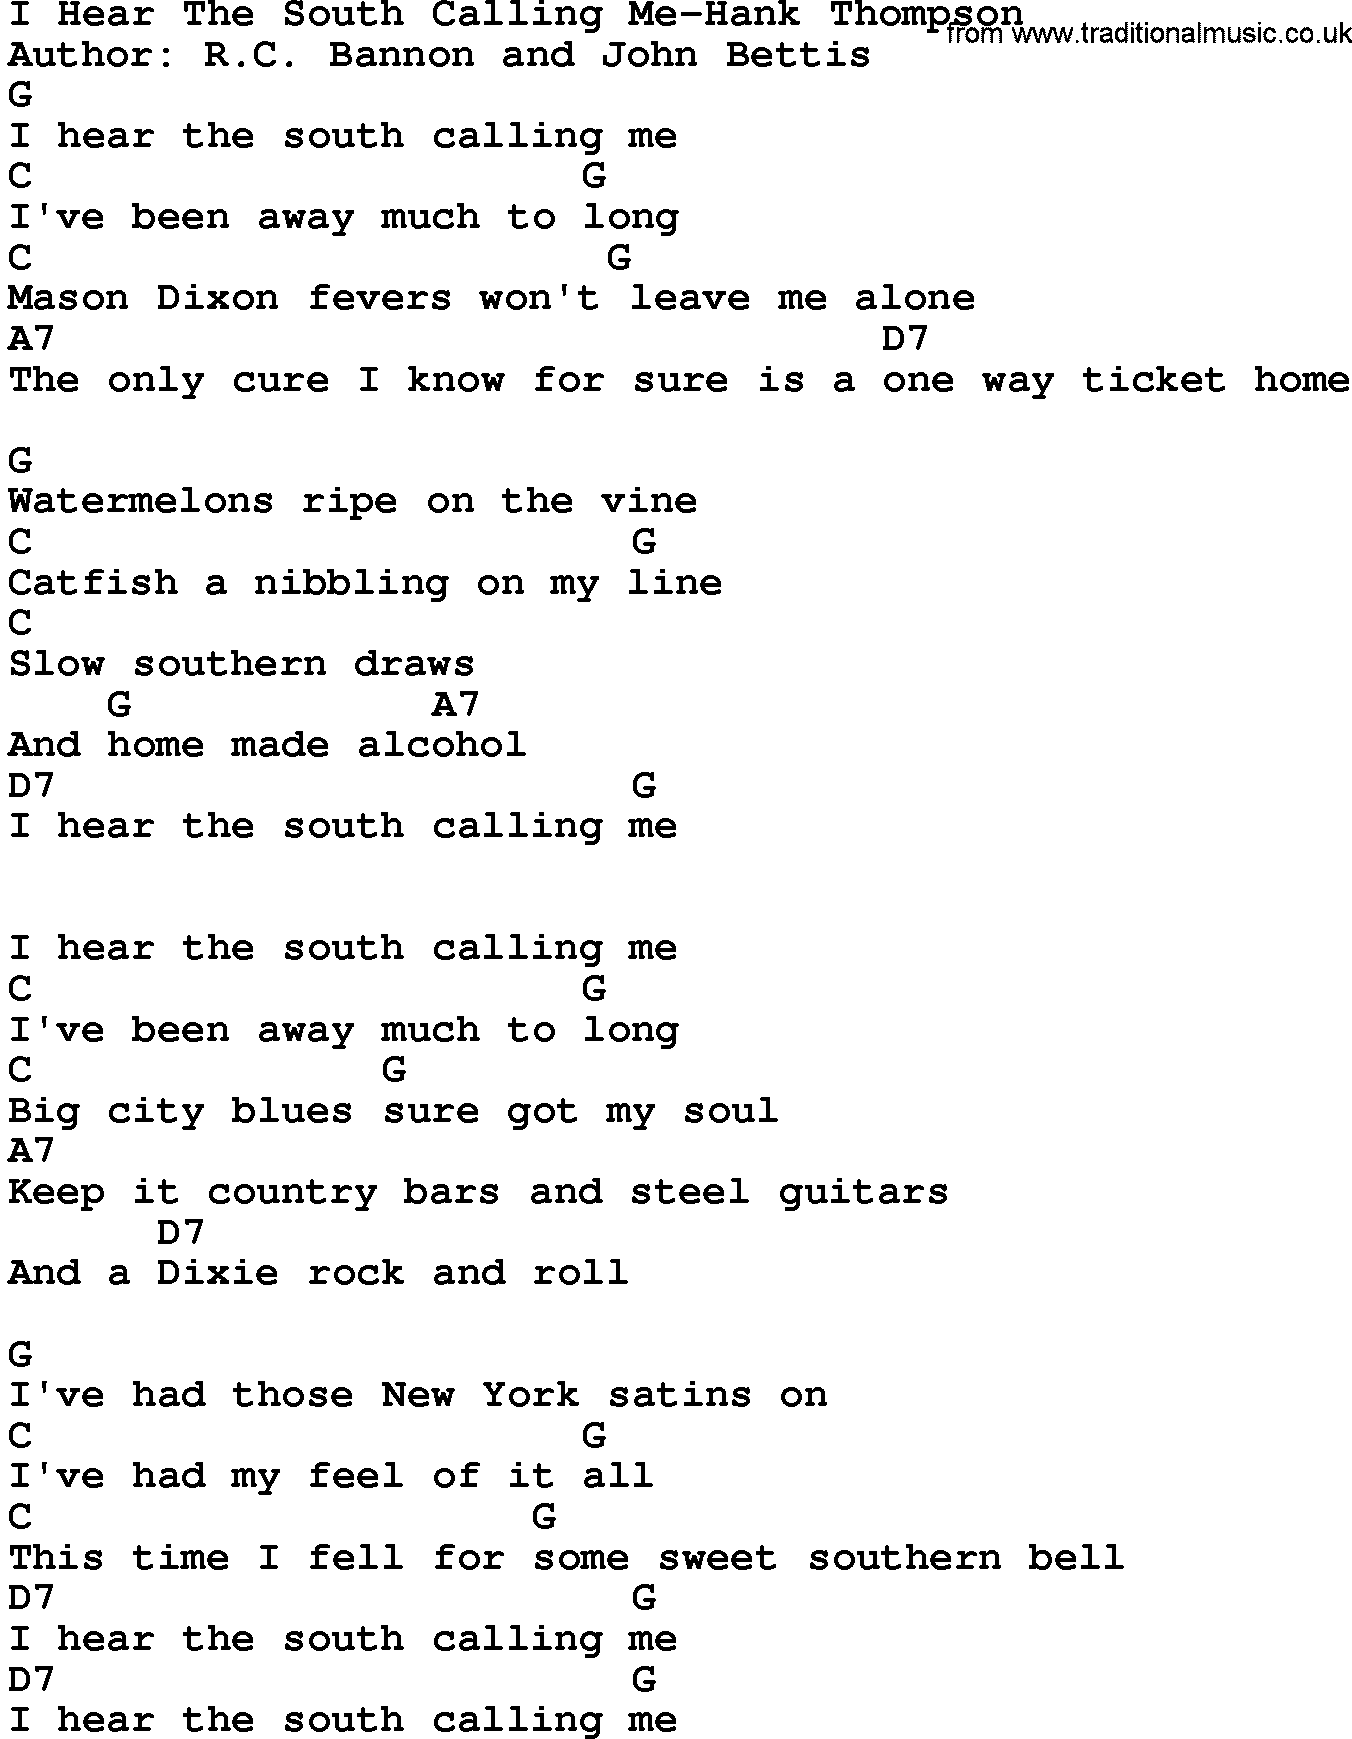 Country music song: I Hear The South Calling Me-Hank Thompson lyrics and chords